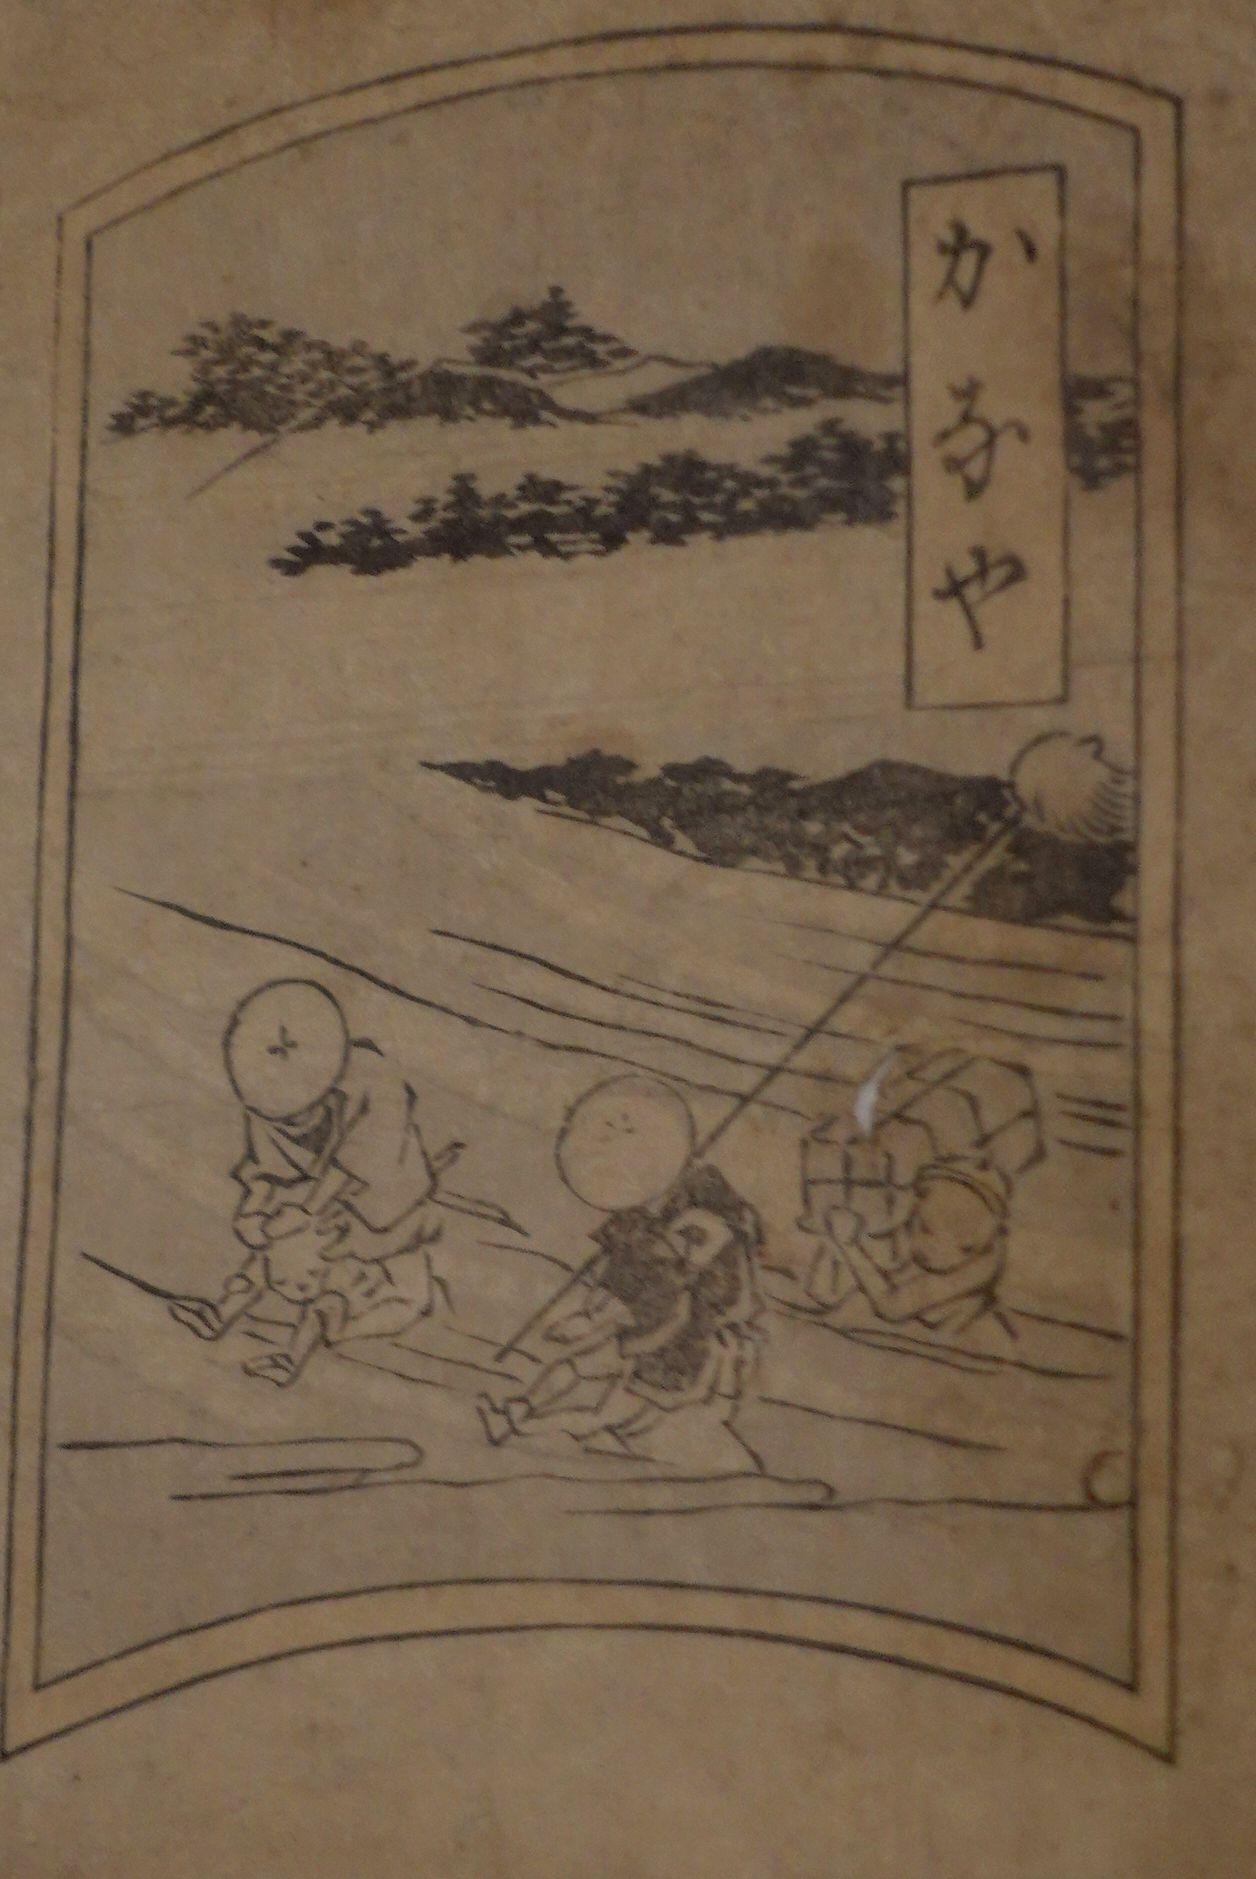 Antique Japanese Woodblock Print by Keisai Eisen 渓斎 英泉 Ric, J008 For Sale 3